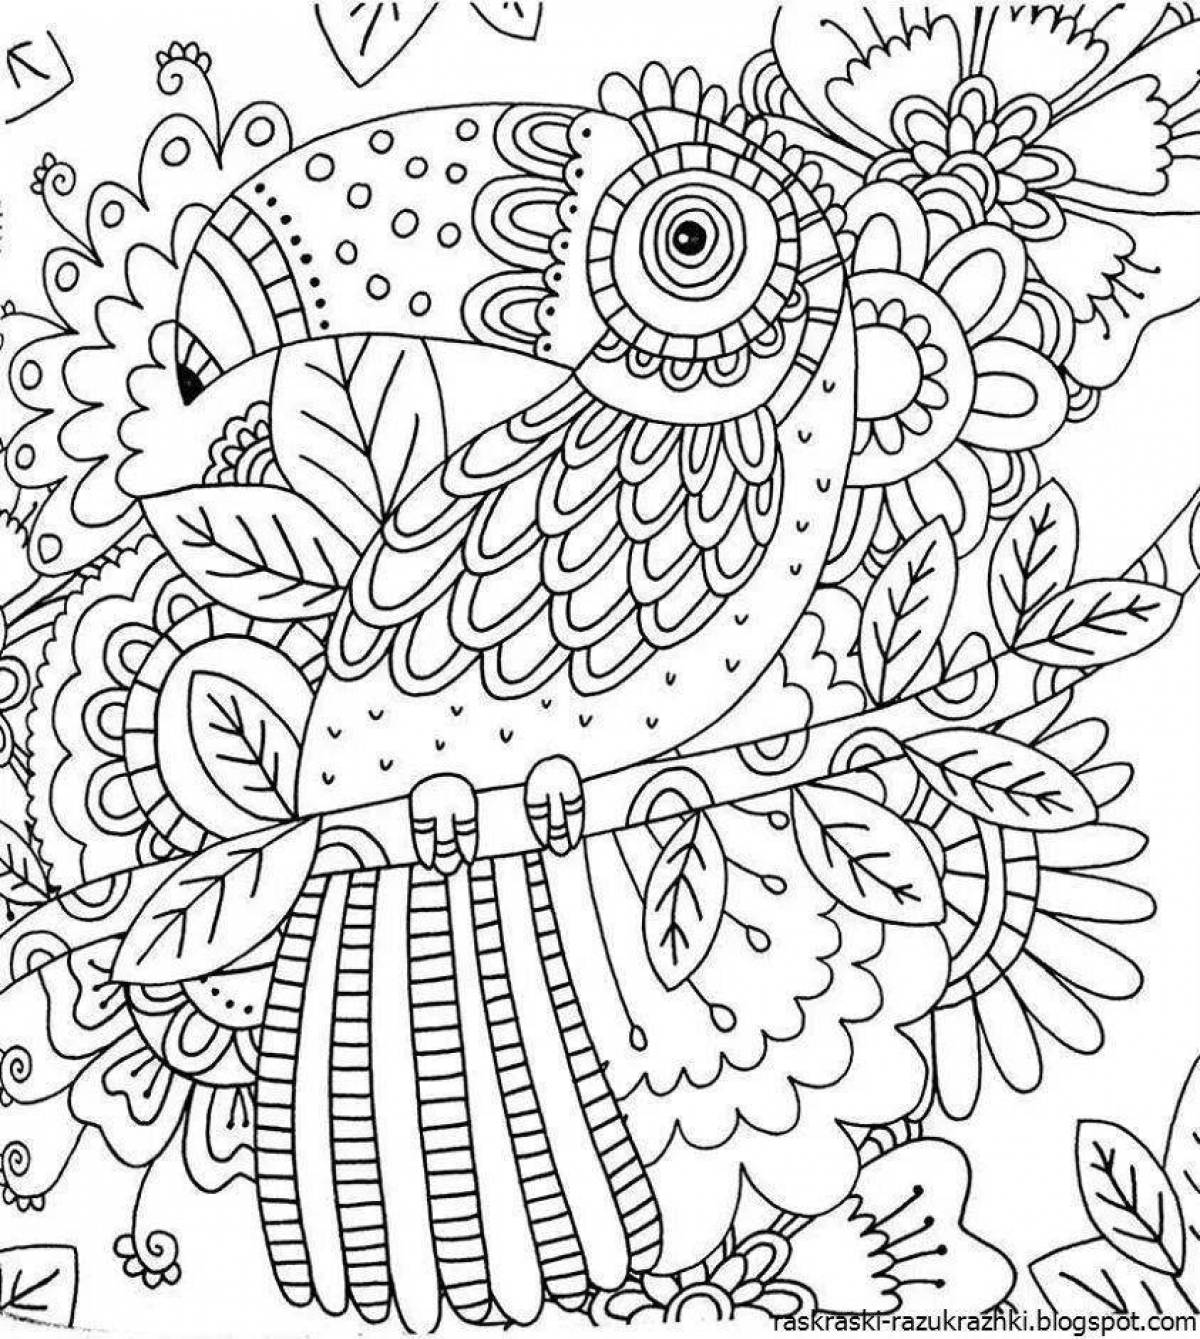 Attractive large anti-stress coloring book